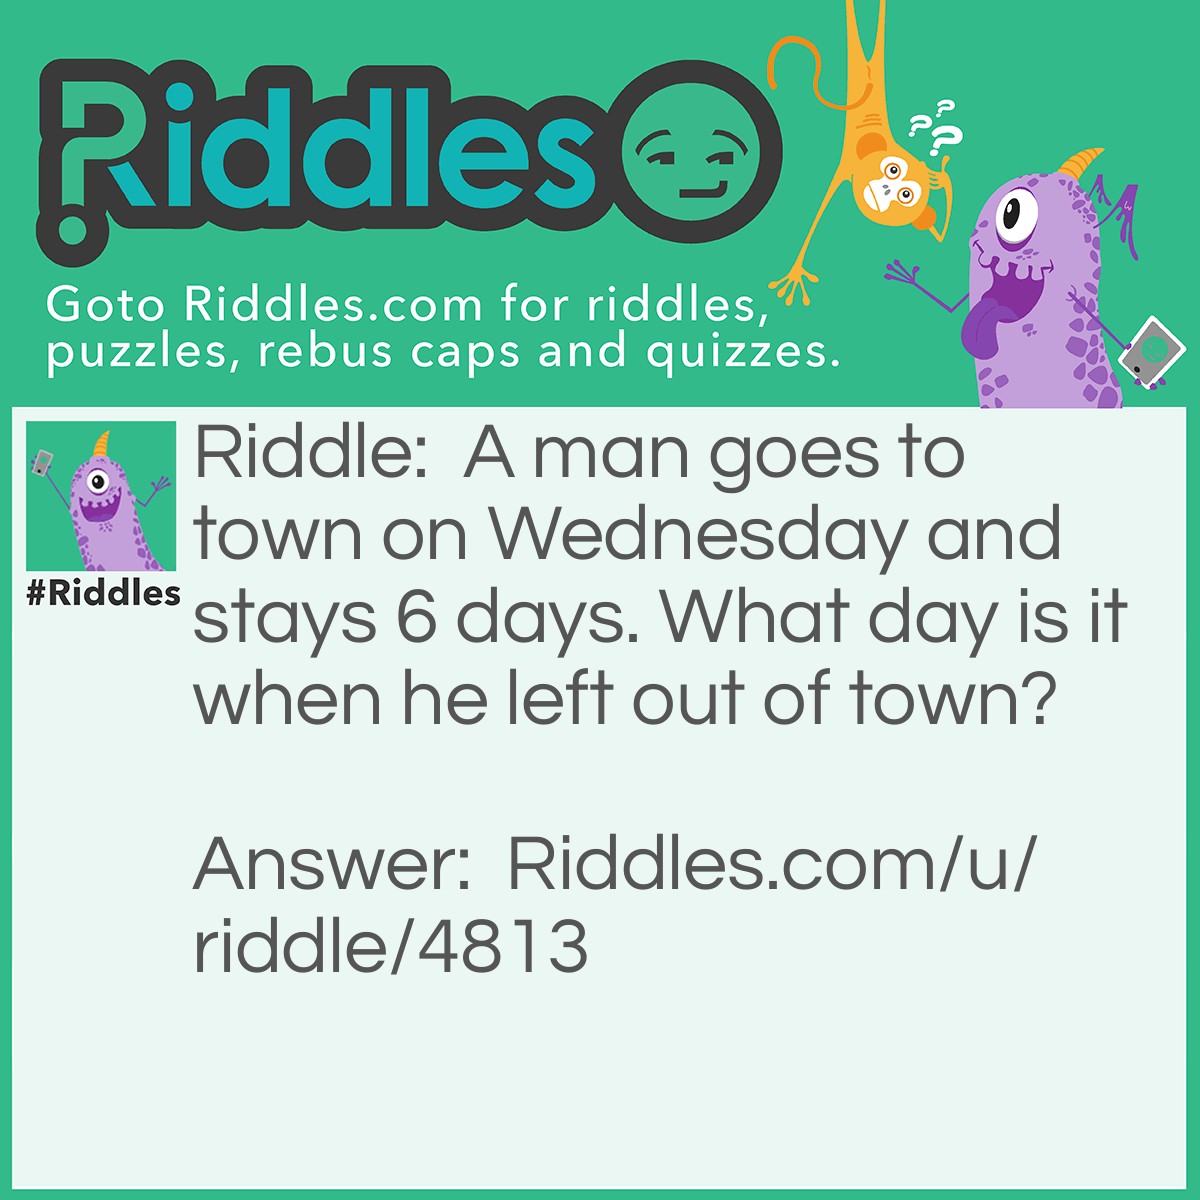 Riddle: A man goes to town on Wednesday and stays 6 days. What day is it when he left out of town? Answer: Wednesday. He stayed 6 days and left on the 7th day.